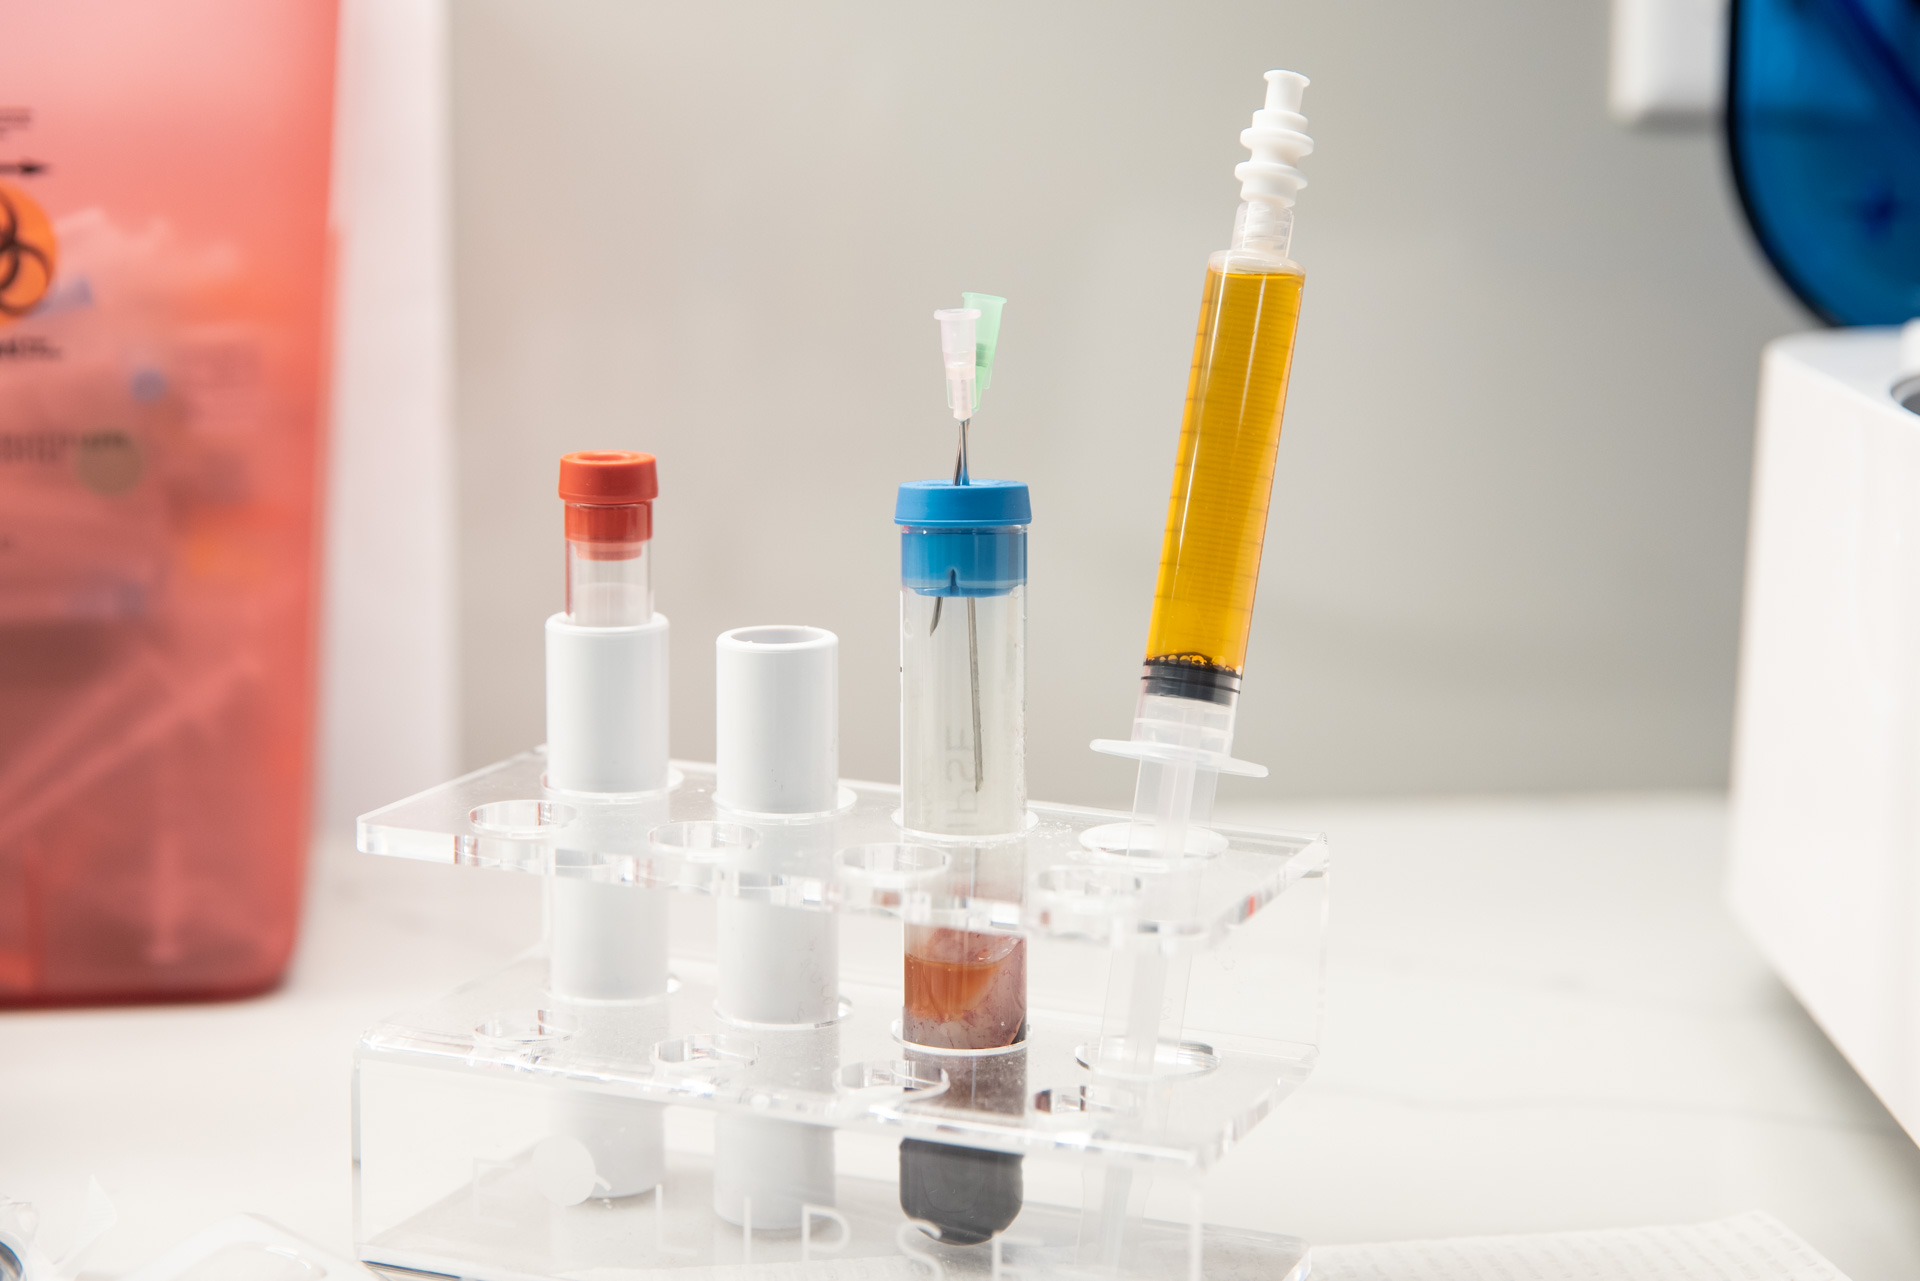 A syringe containing PRP for hair restoration rests on a stand